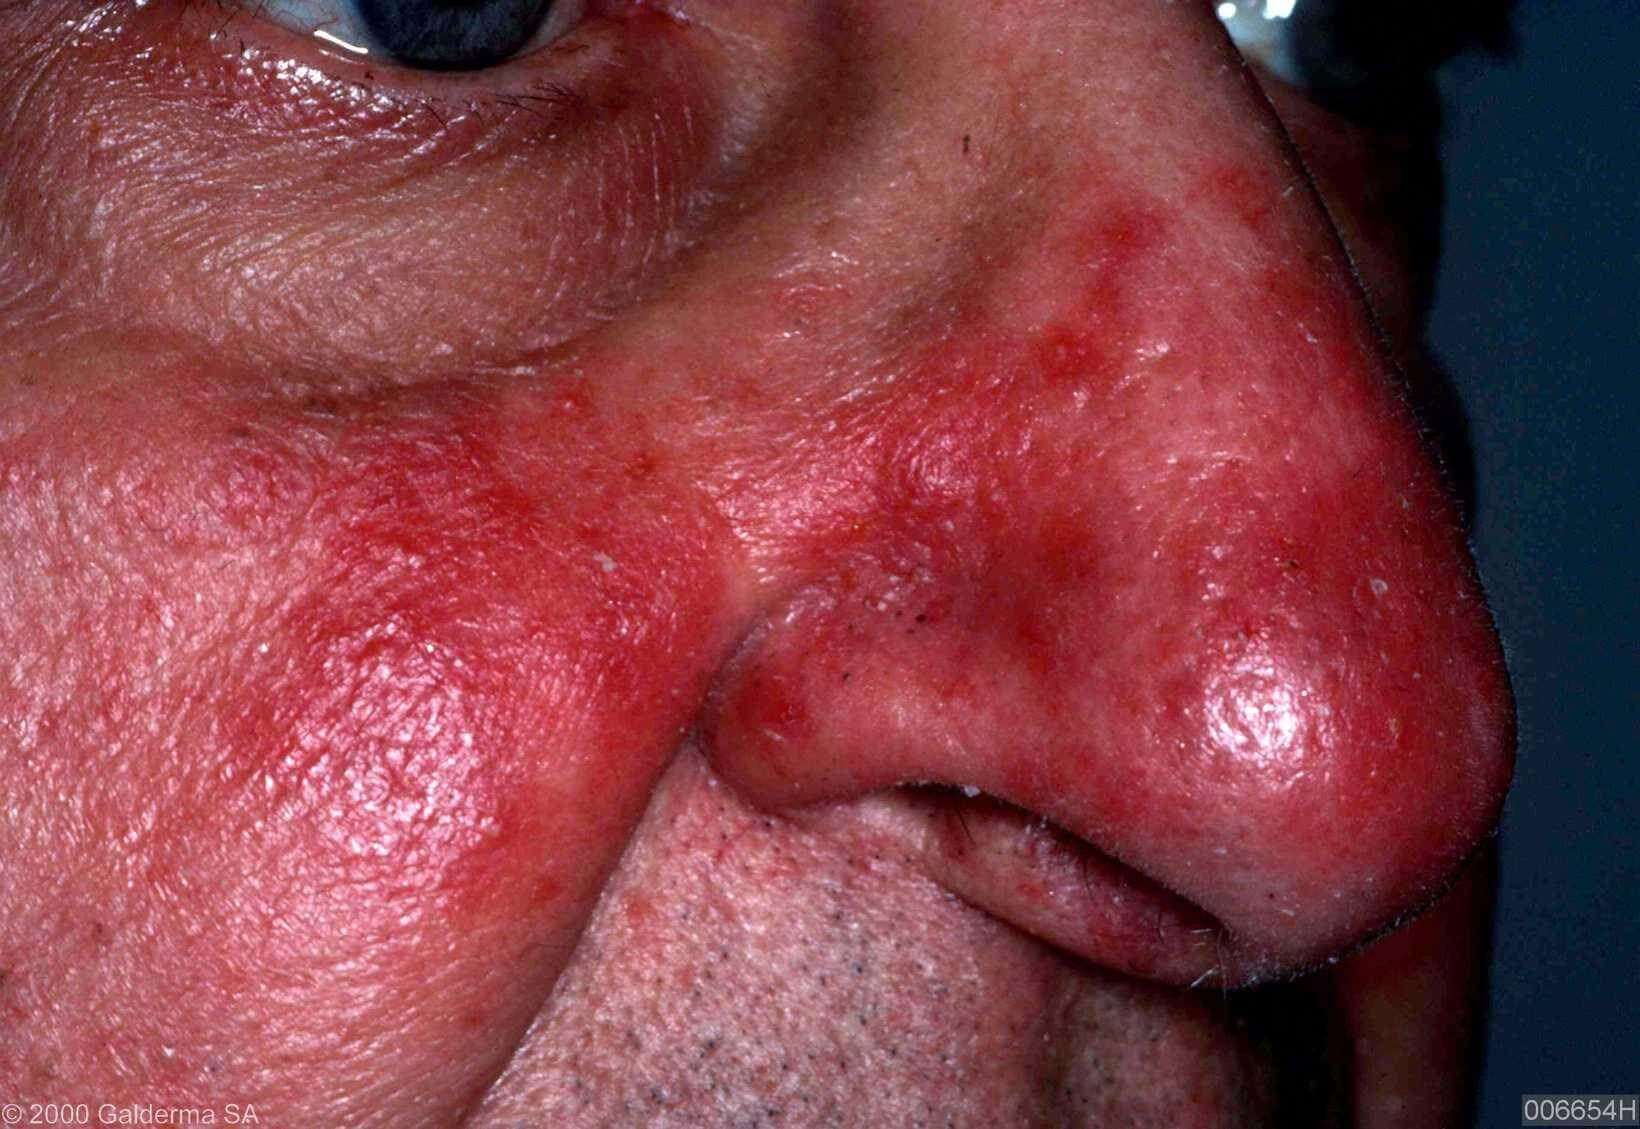 The Link Between Rosacea and Alcohol - WebMD